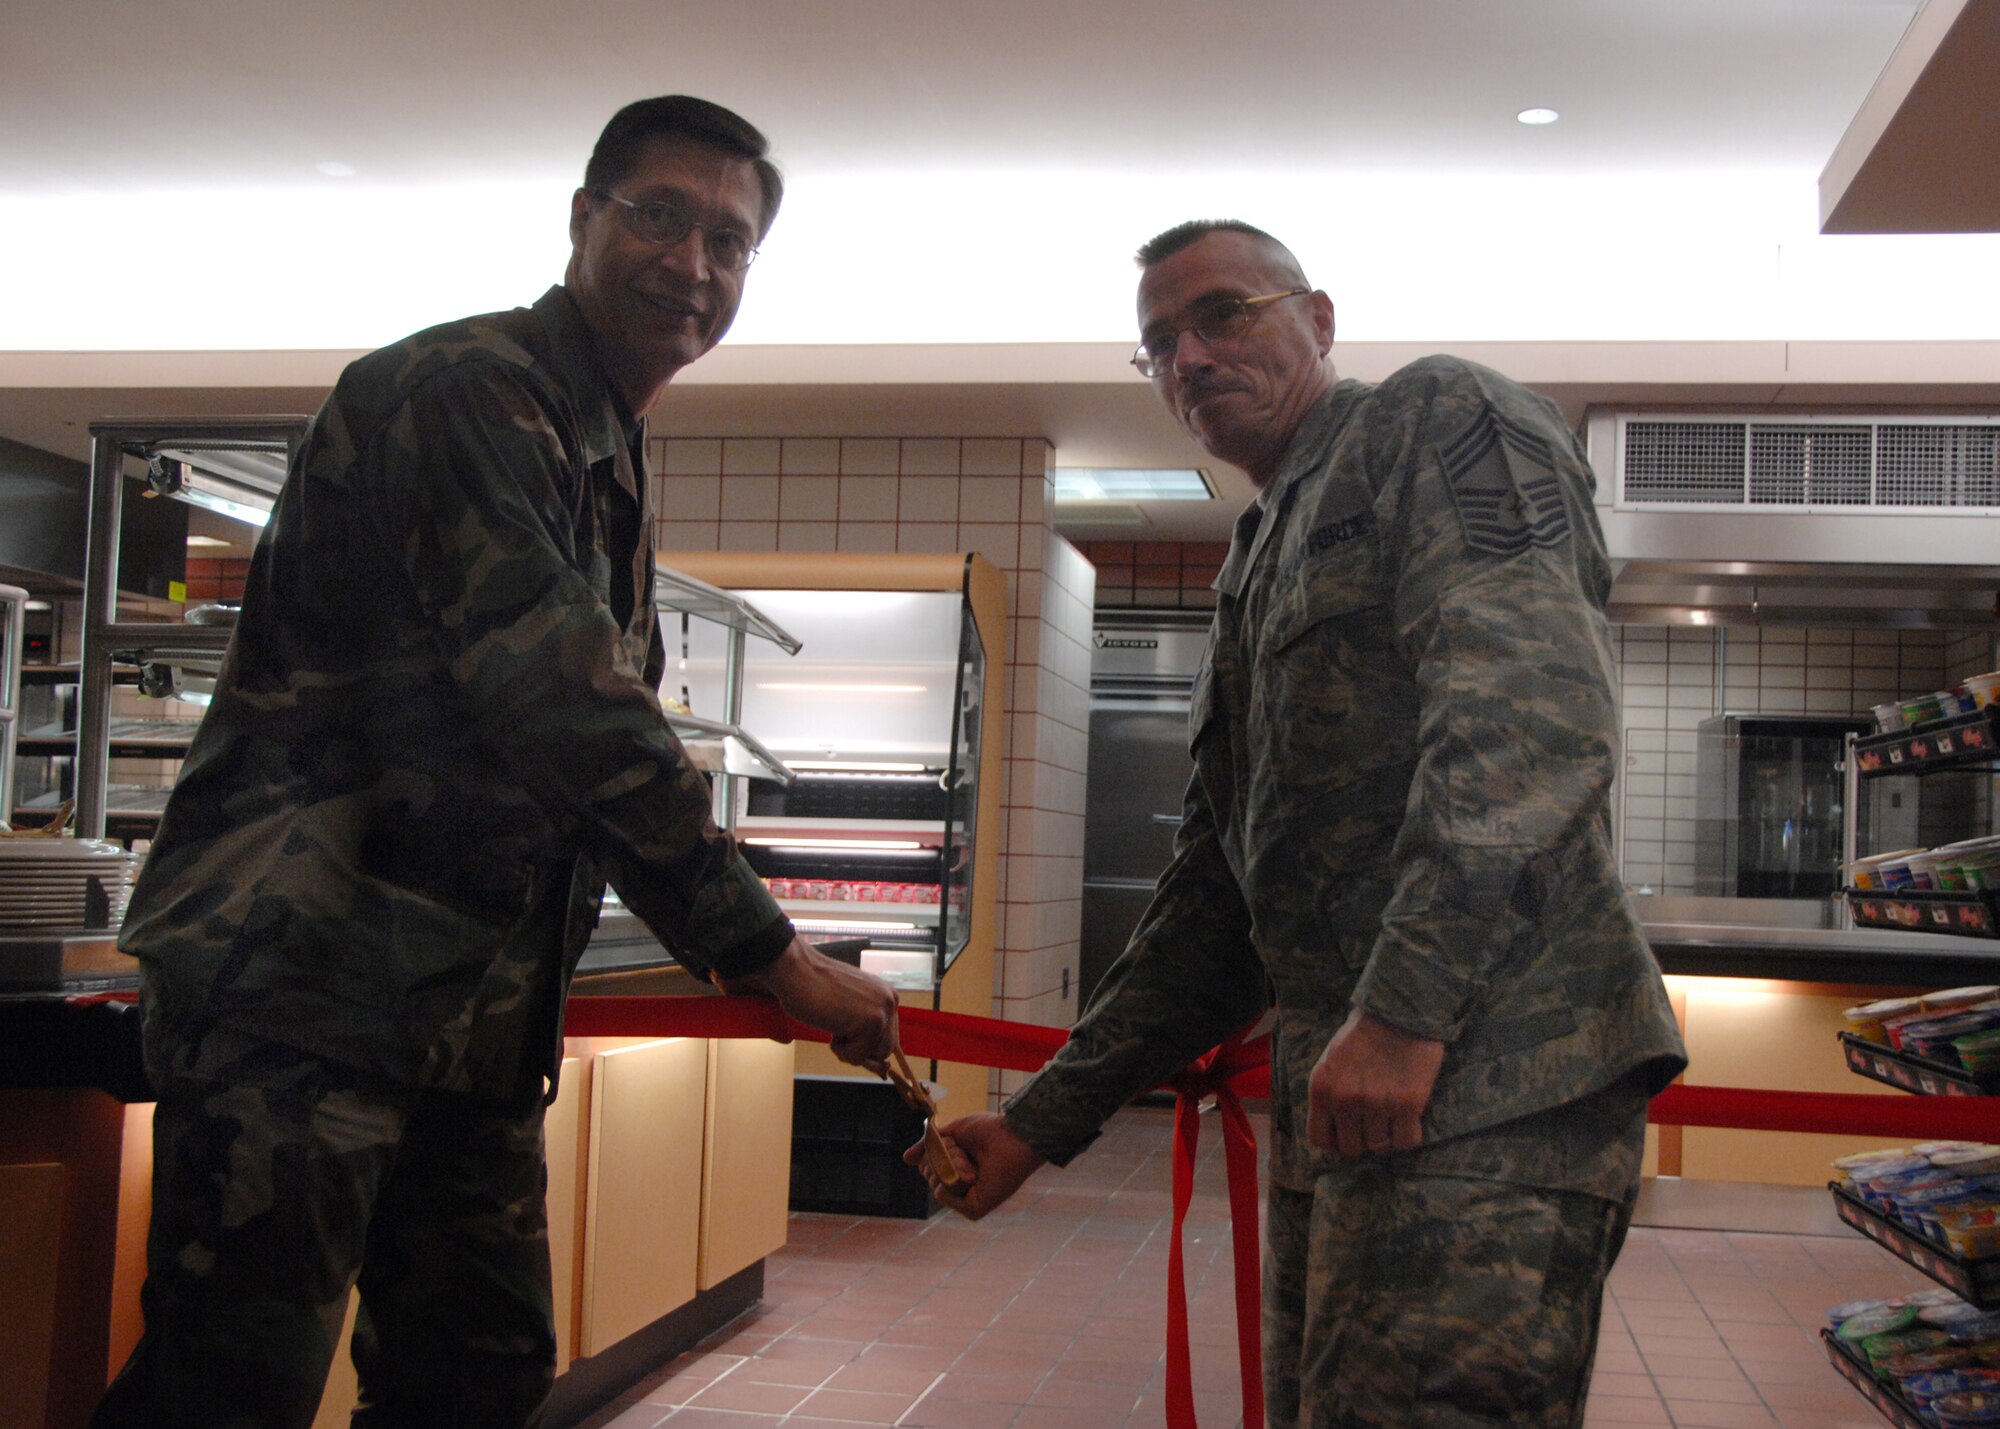 EIELSON AIR FORCE BASE, Alaska--Col. John Stutts, 354th Mission Support Group commander, and Chief Master Sgt. Richard Womer, 354th MSG superintendent, cut the ribbon for the newly-redesigned dining facility the morning of Feb. 6. The DFAC underwent a 10-week renovation, which refurbished facilities such as the serving lines and kitchen equipment to better serve facility-goers, especially during base exercises such as RED FLAG-Alaska. (U.S. Air Force photo by Airman 1st Class Christopher Griffin)